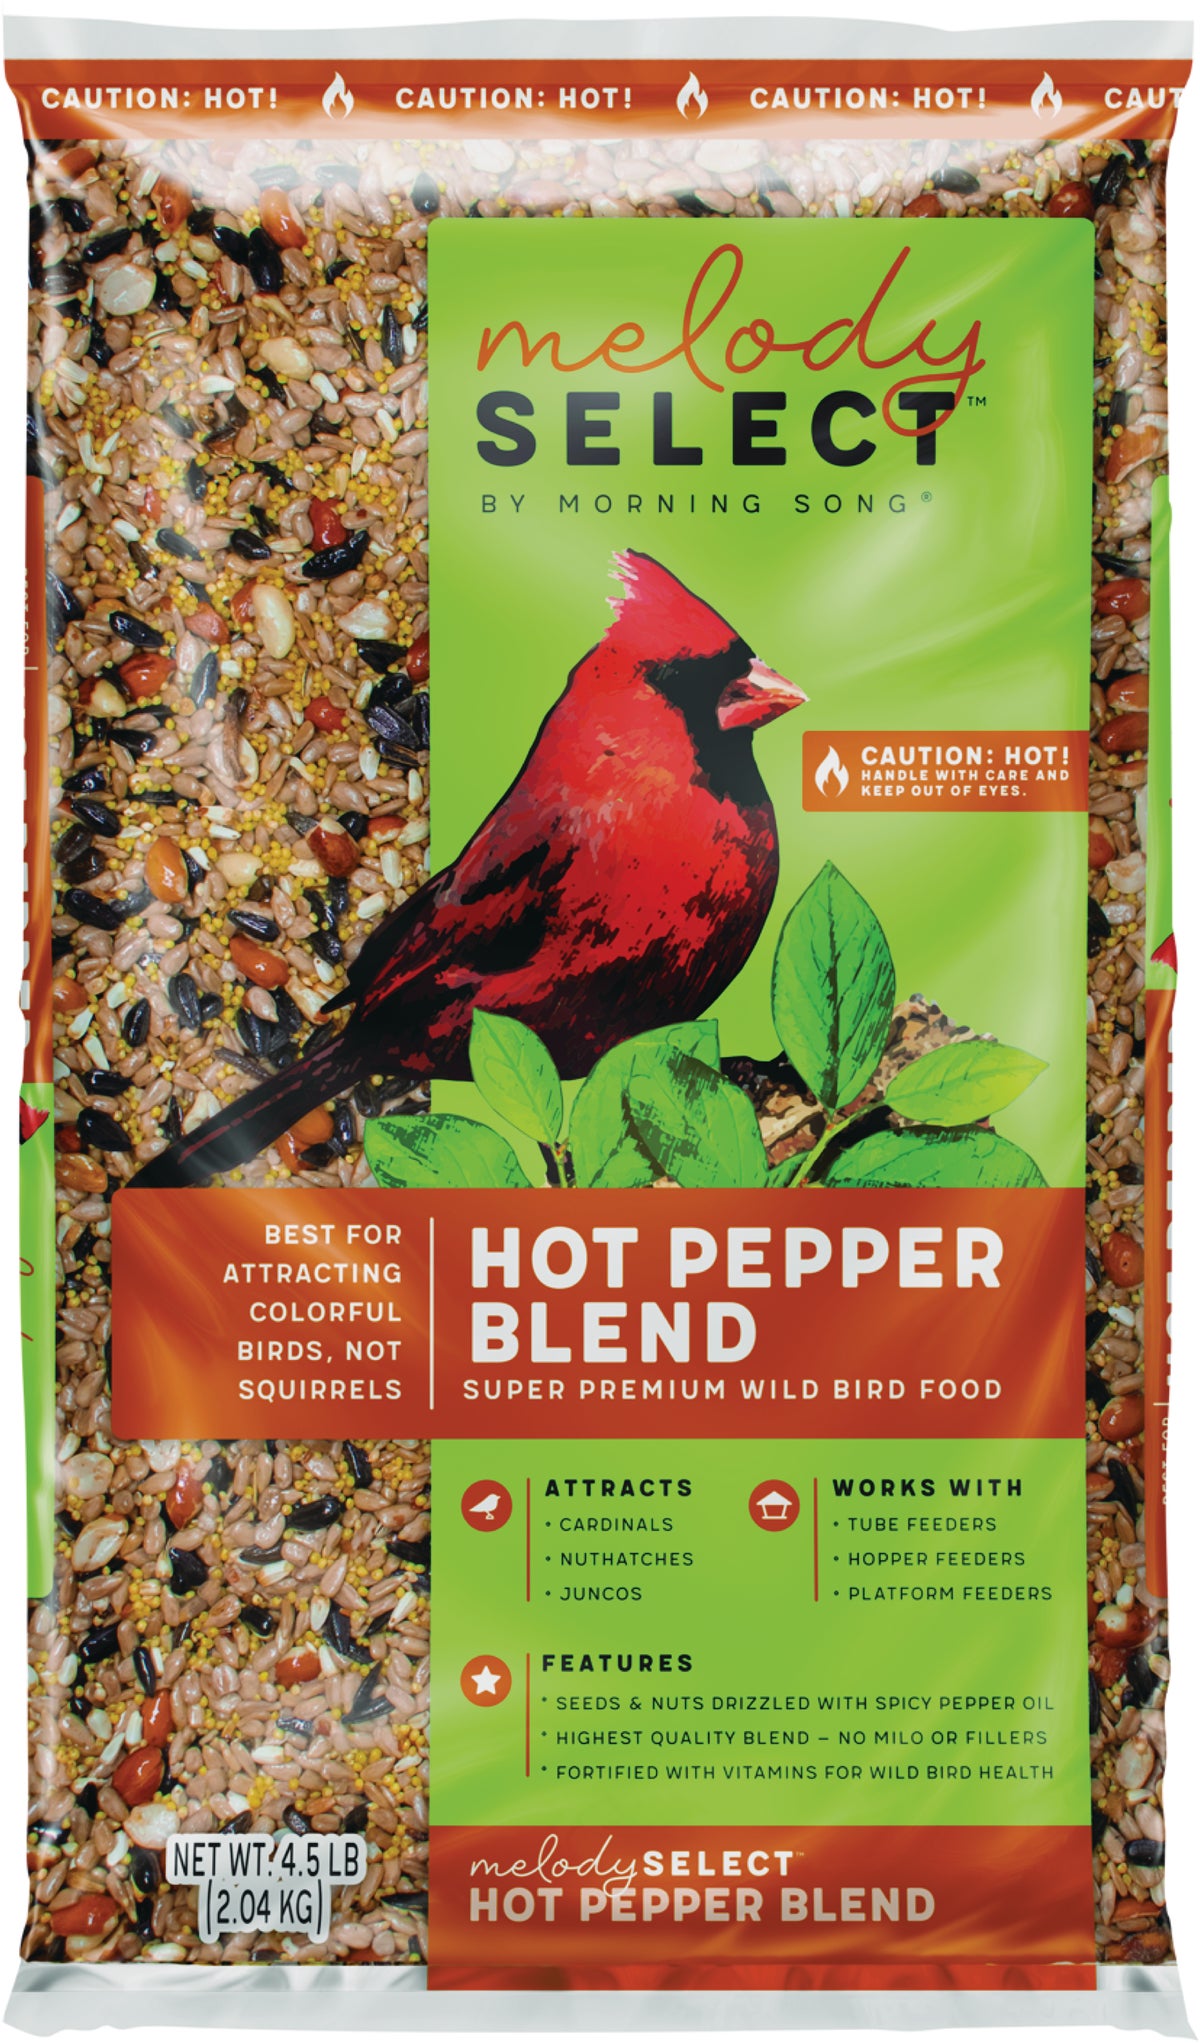 Can Parrots Handle Spicy Delights?